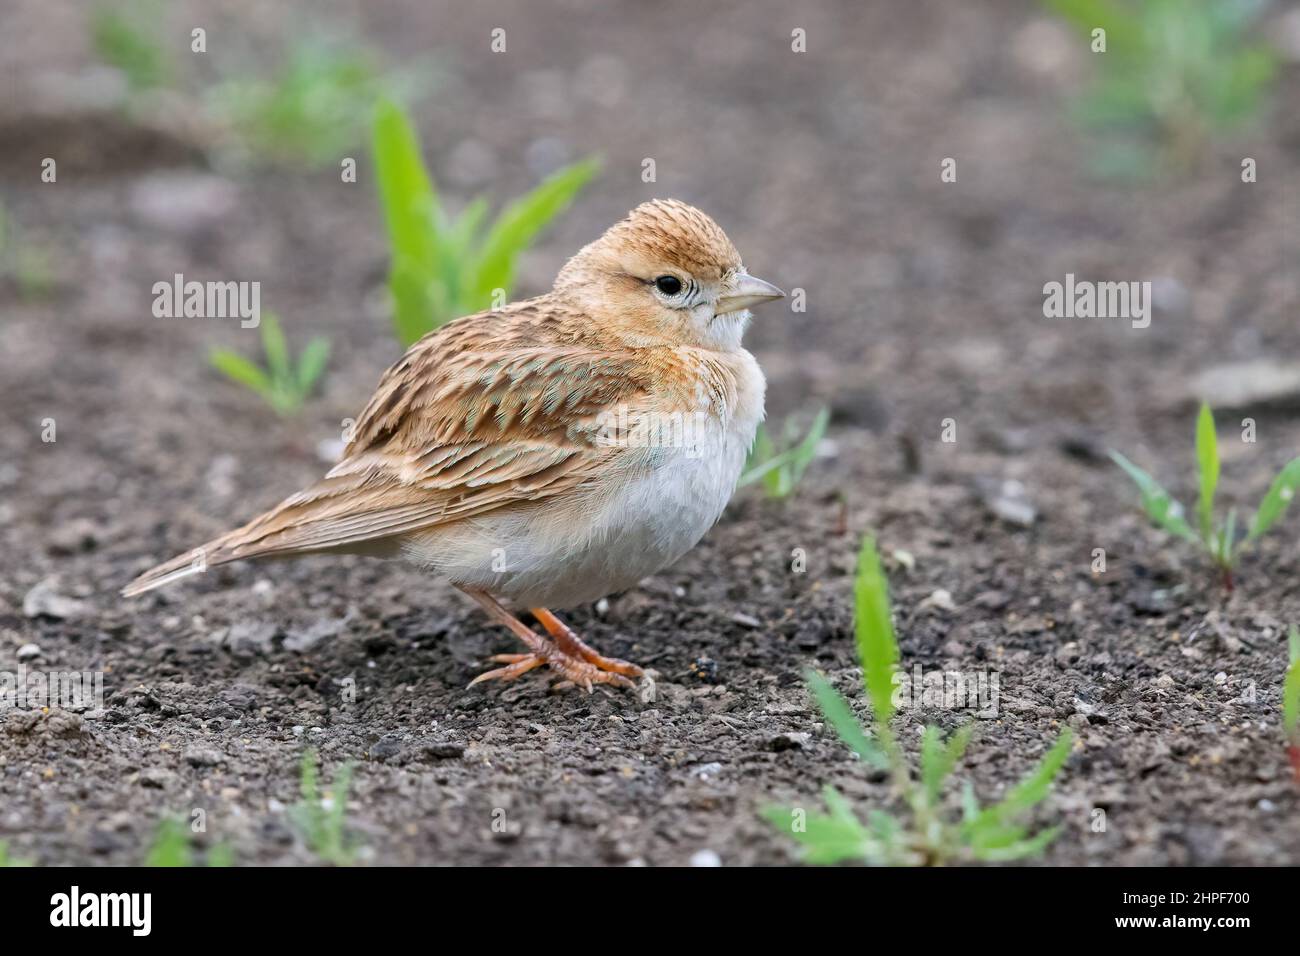 Greater Short-toed Lark (Calandrella brachydactyla), side view of an adult standing on the ground, Campania, Italy Stock Photo